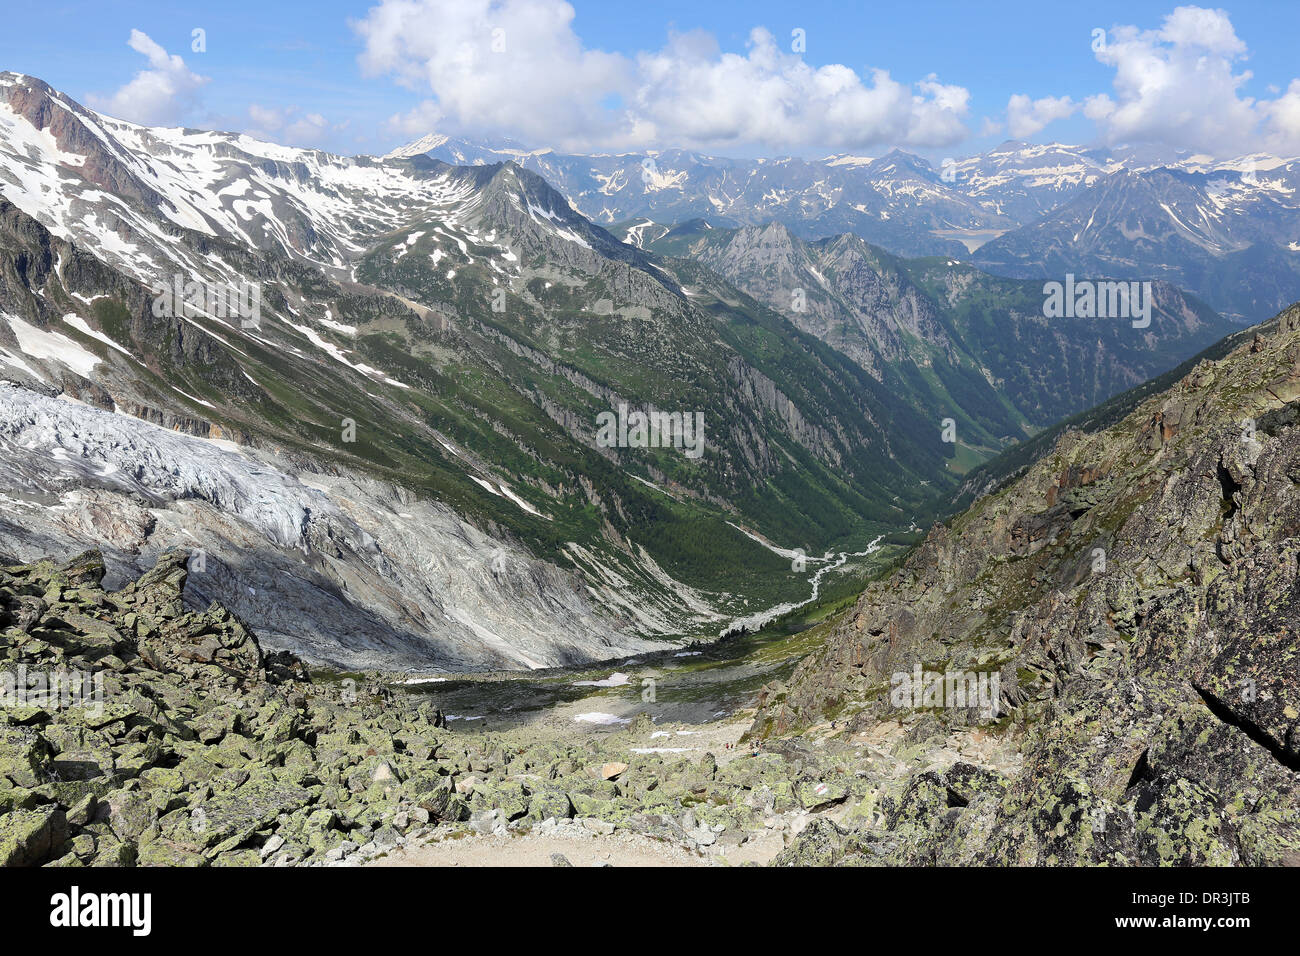 The Trient Glacier and valley. Sheepbacks rocks. The Mont Blanc mountain Massif. Alpine landscape of Swiss Alps. Stock Photo